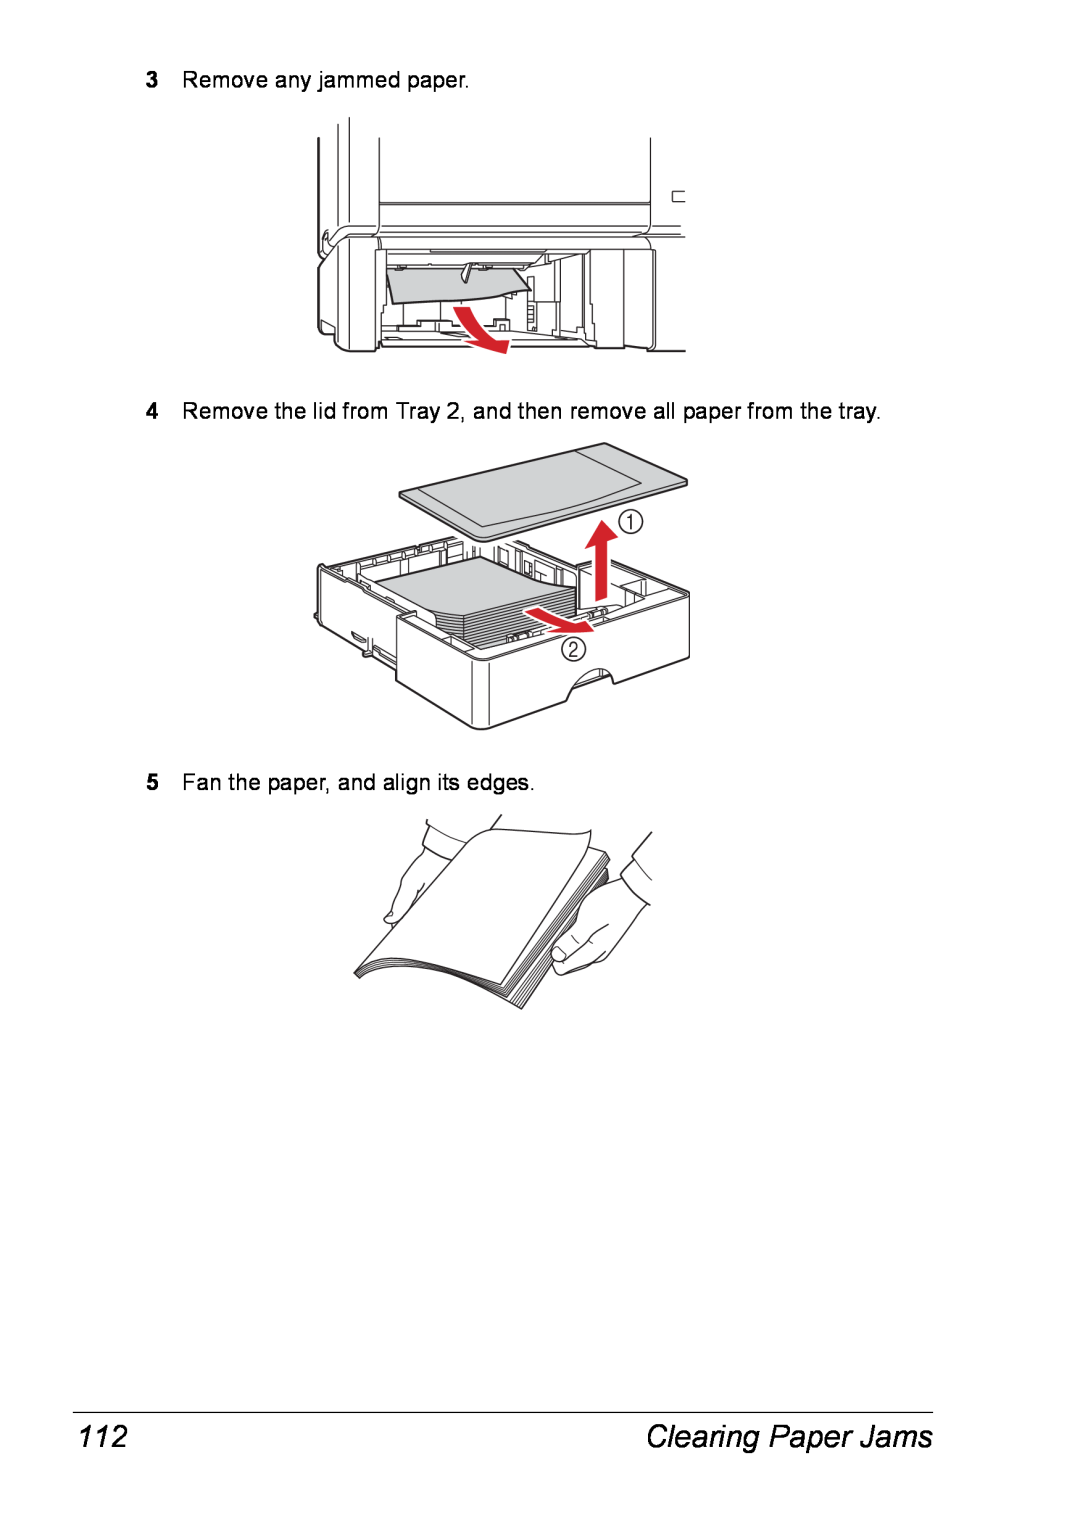 Xerox 6120 manual Clearing Paper Jams, Remove any jammed paper, Fan the paper, and align its edges 